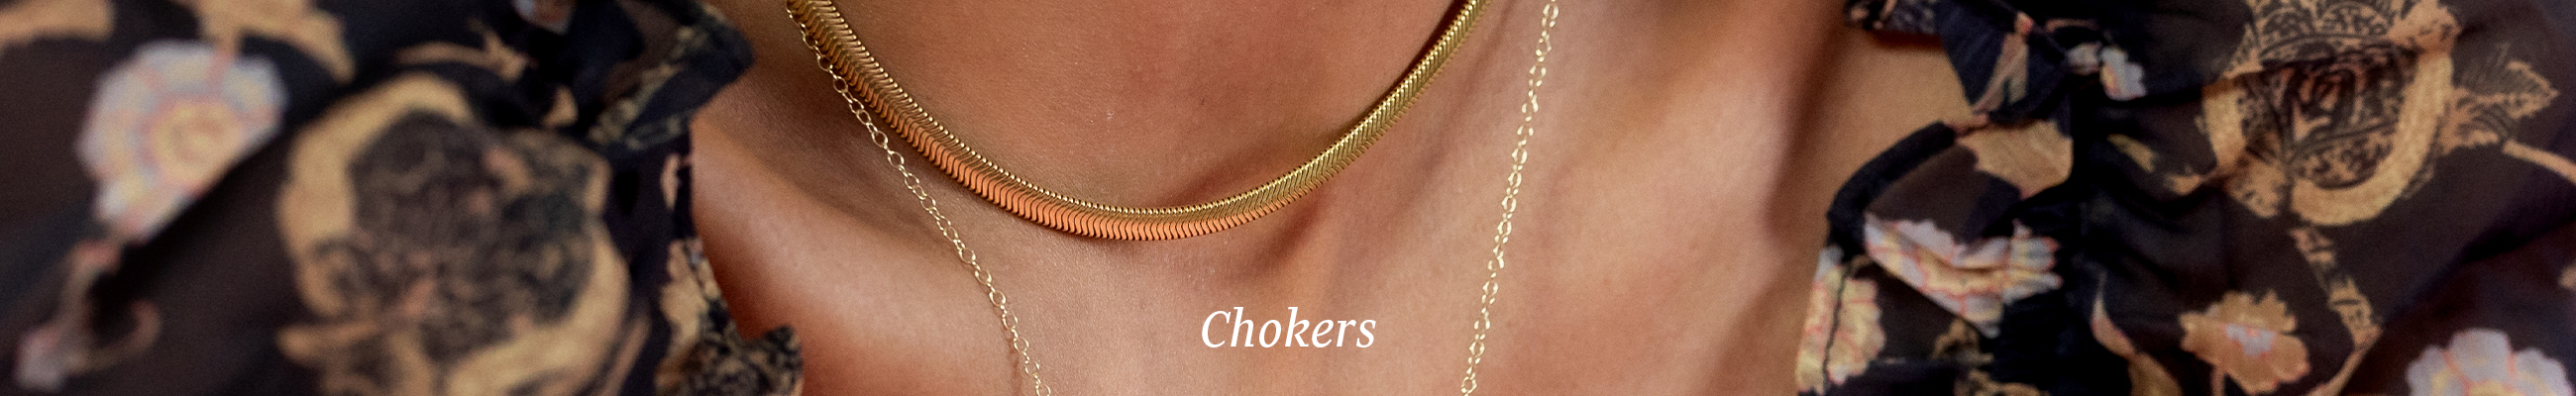 0f28019c-3a17-4c26-9cb5-659547ed159eCollection_Banner_Necklaces_Chokers.jpg